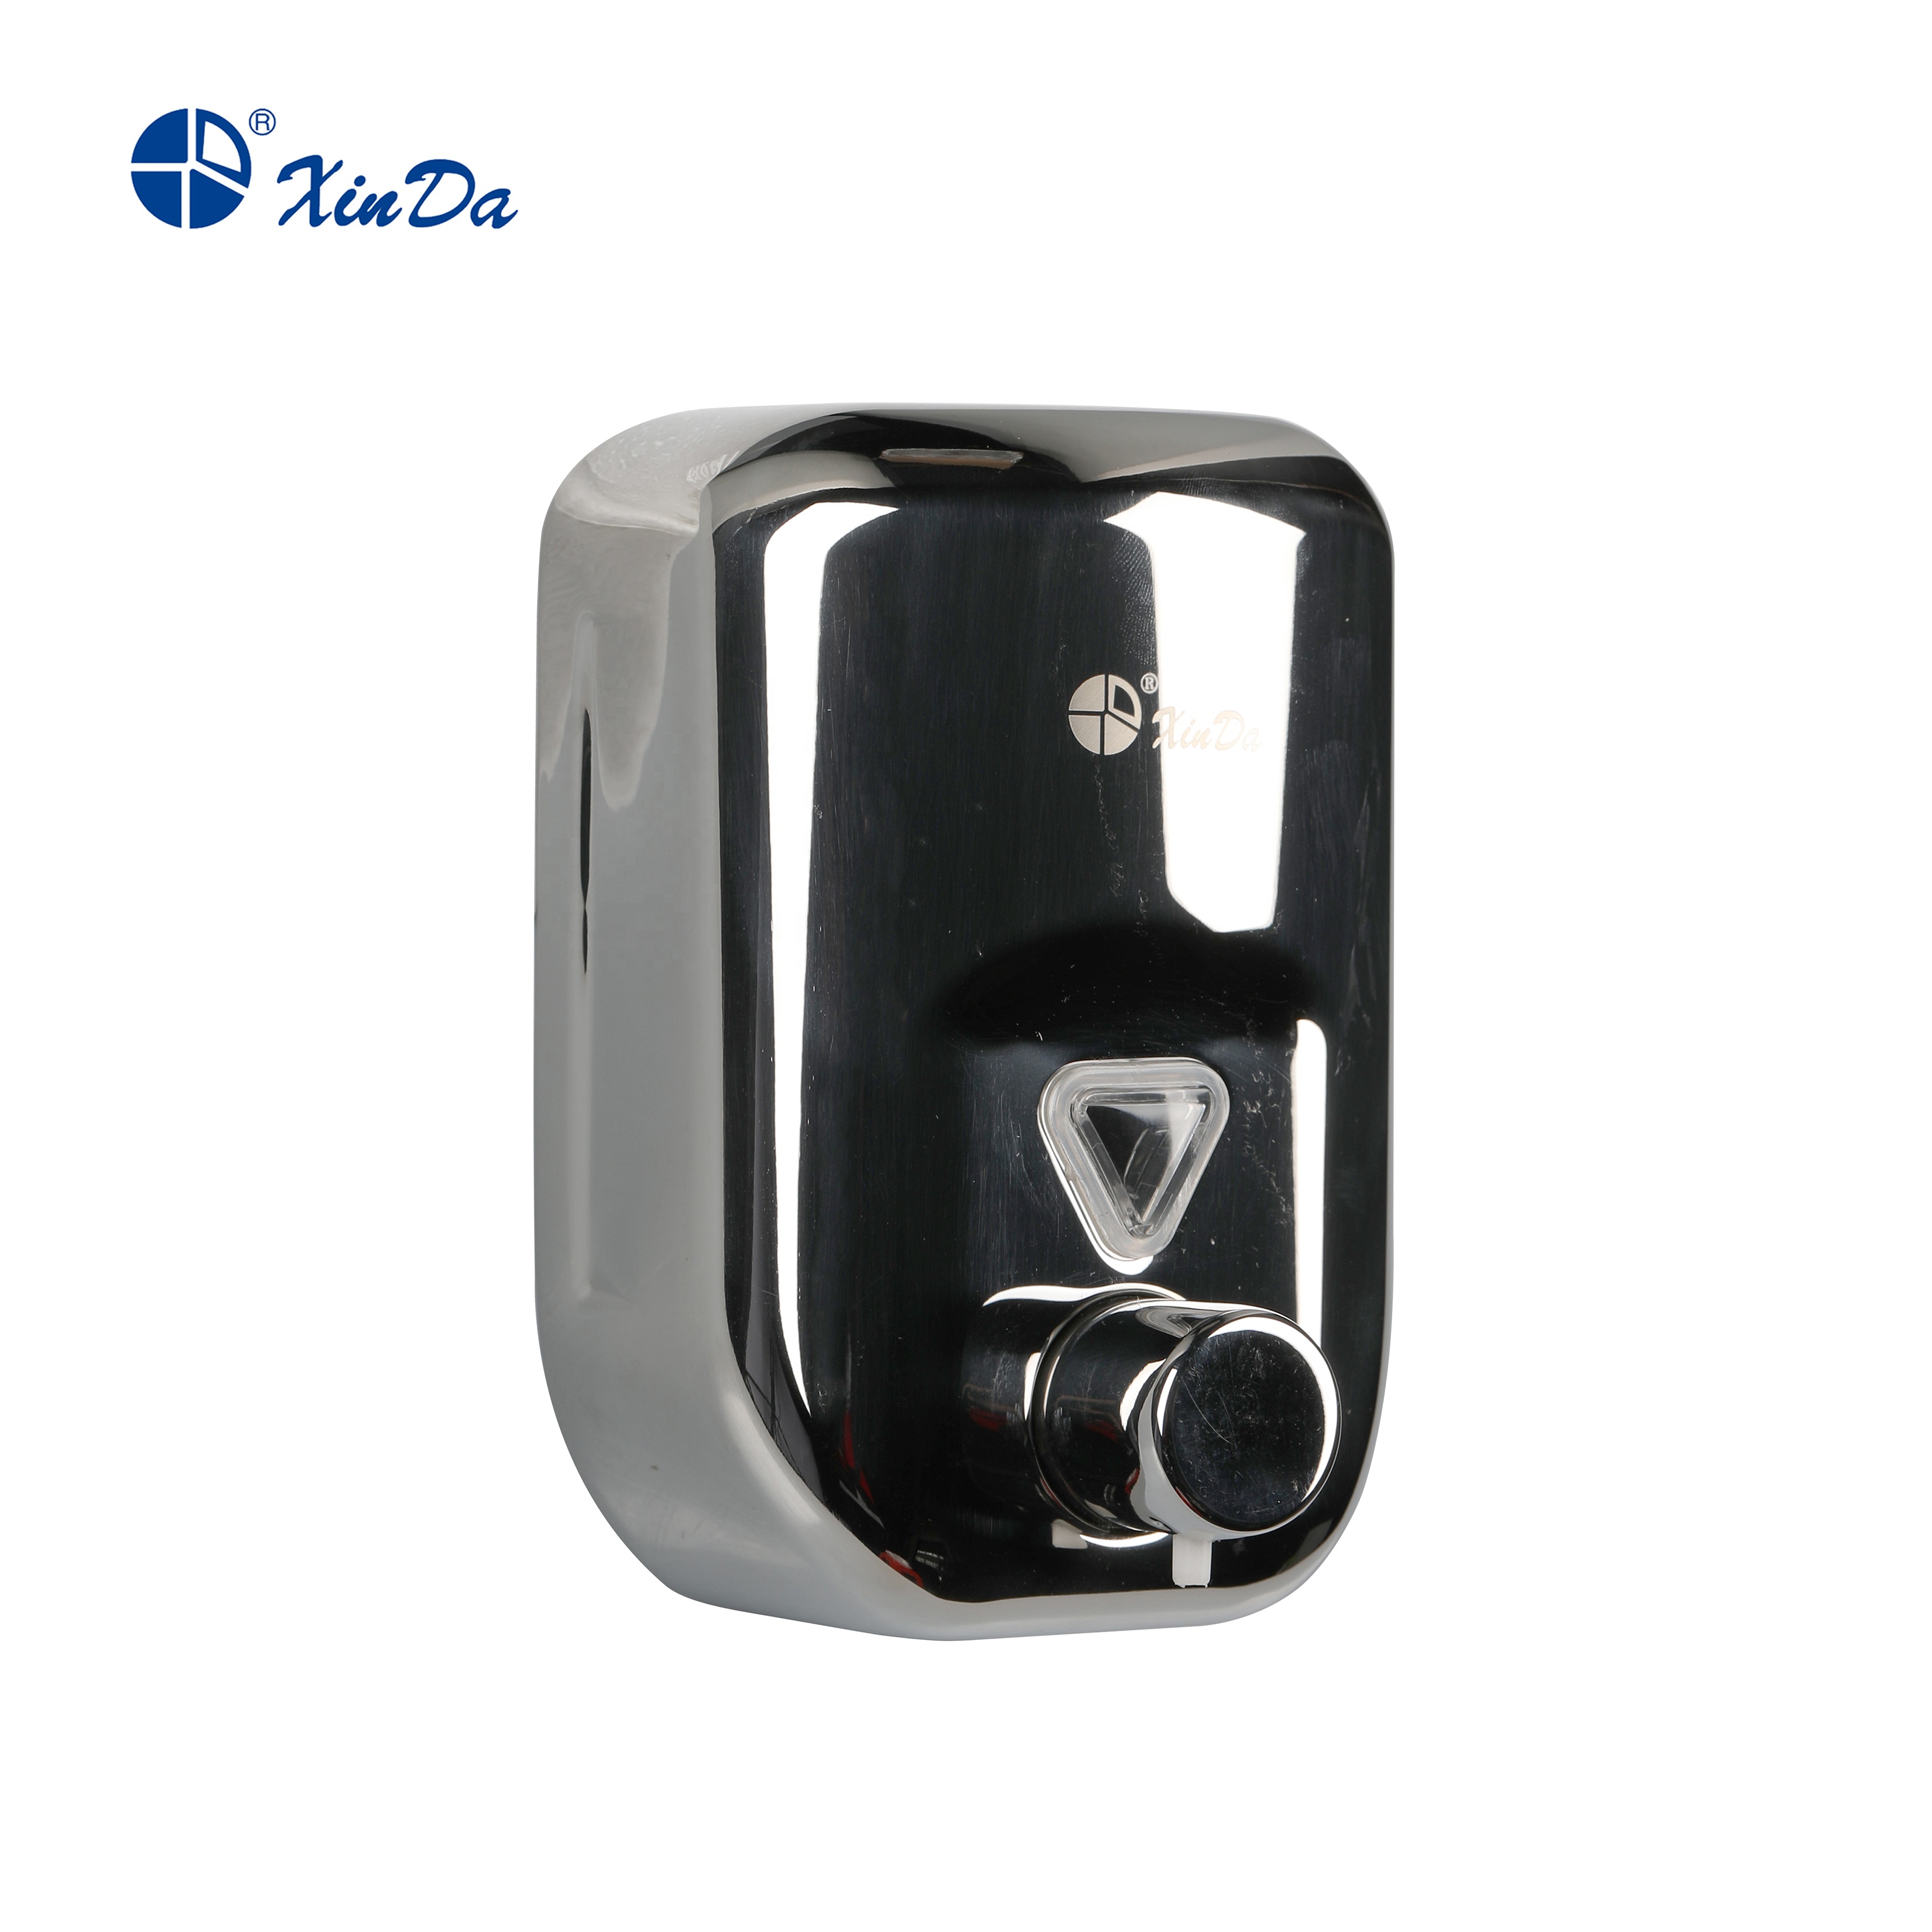 XINDA ZYQ82 Stainless Steel Wall Mounted Manual Soap Dispenser